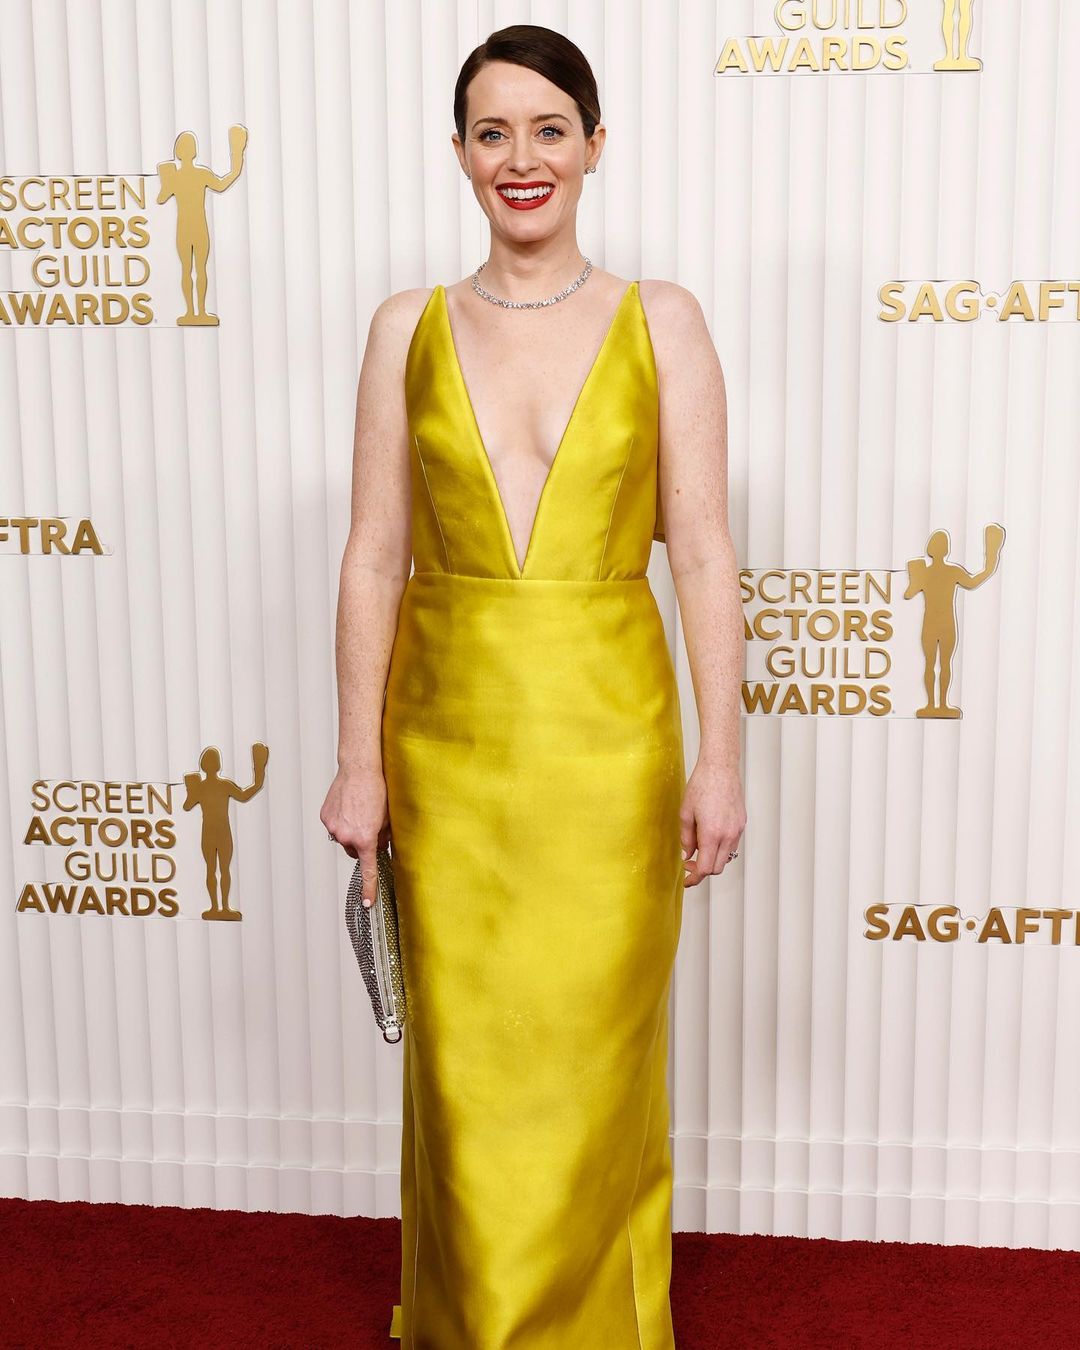 Claire Foy looked gorgeous in a yellow silk dress by Prada